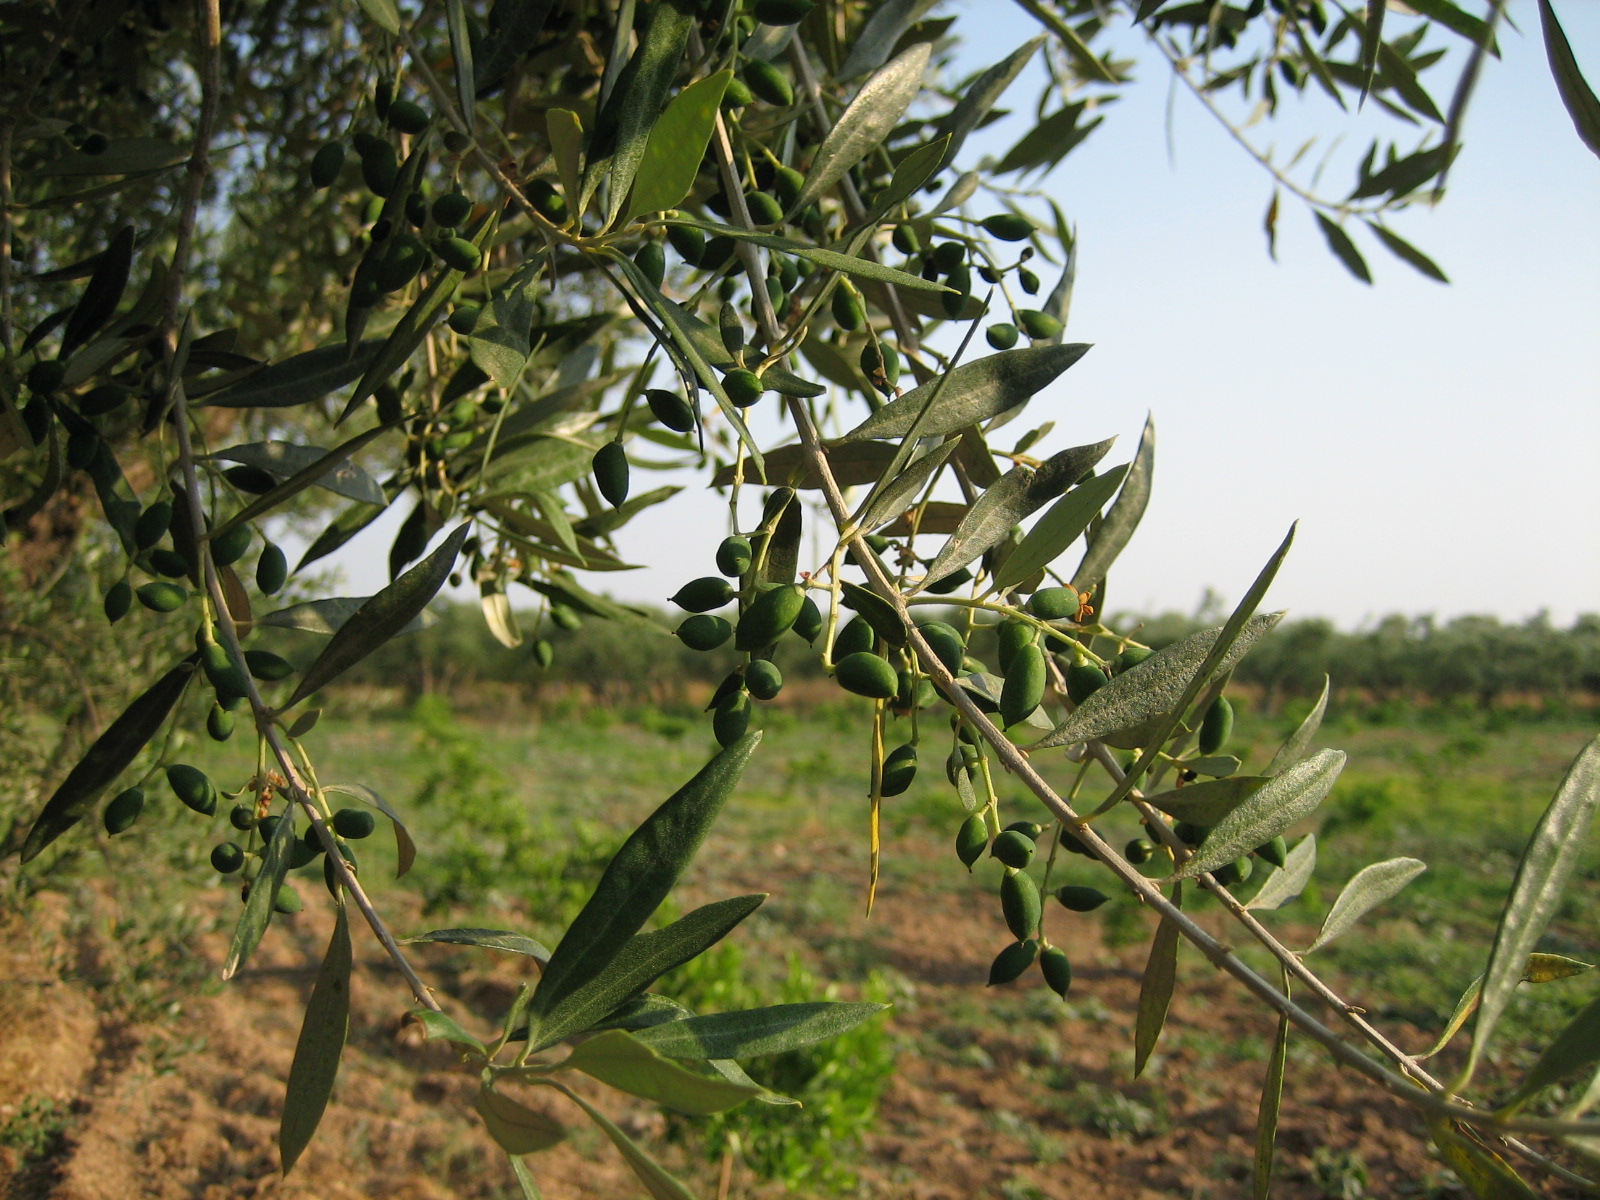 Kouzini olives getting ready for the harvest!